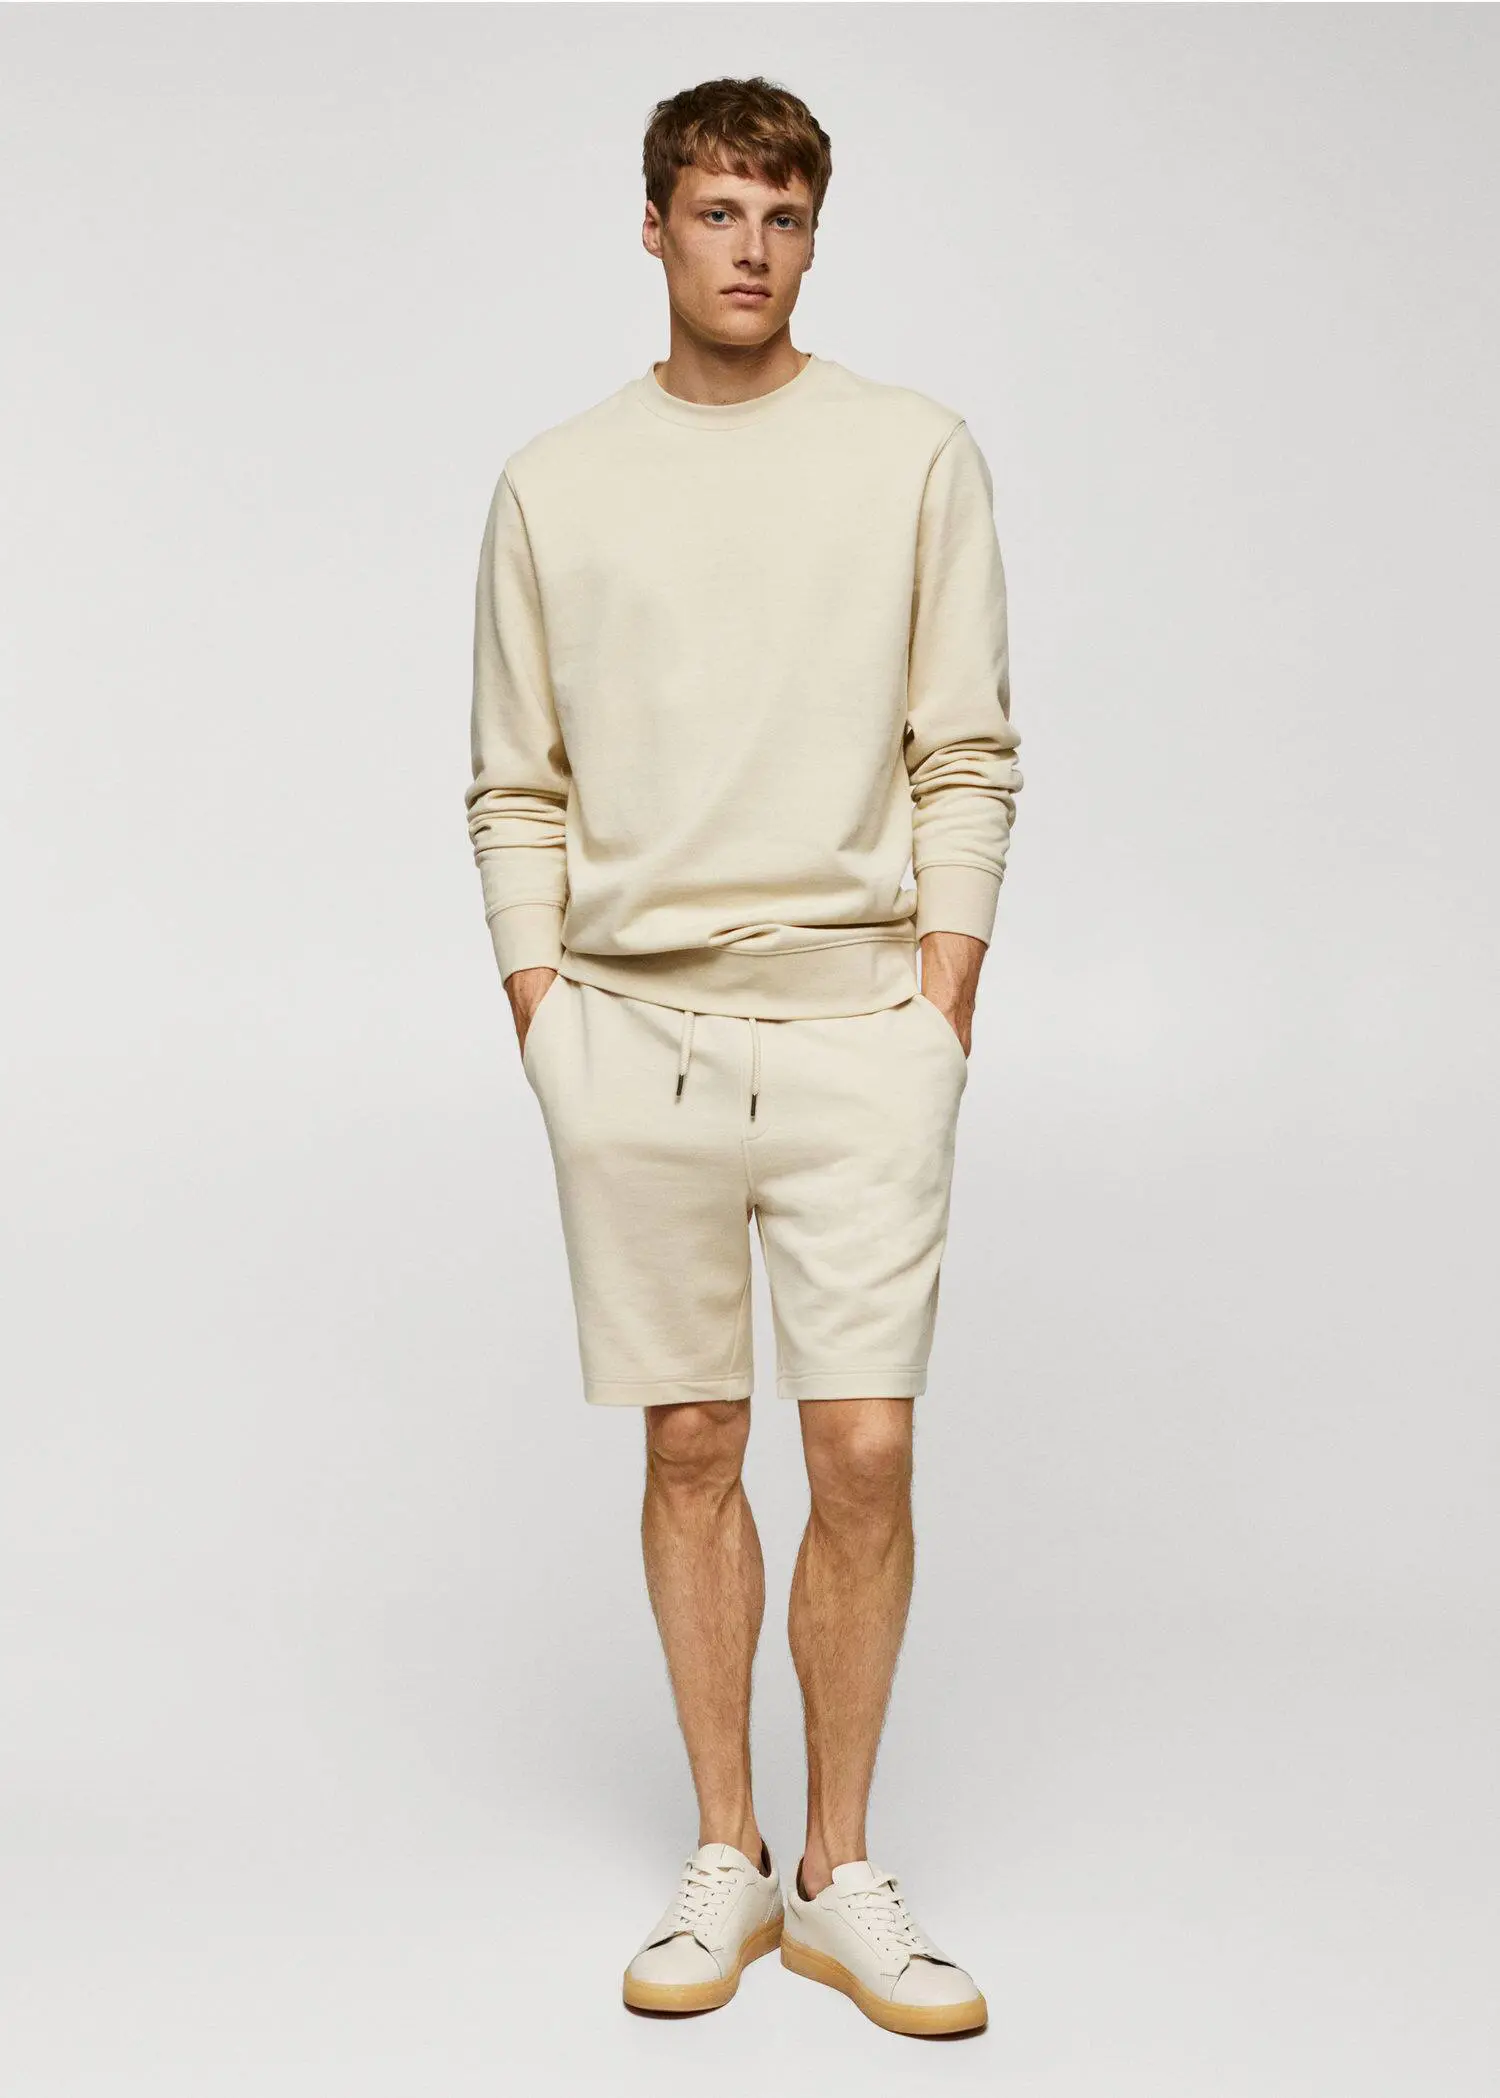 Mango 100% cotton basic sweatshirt . a man in a beige outfit stands in front of a white wall. 